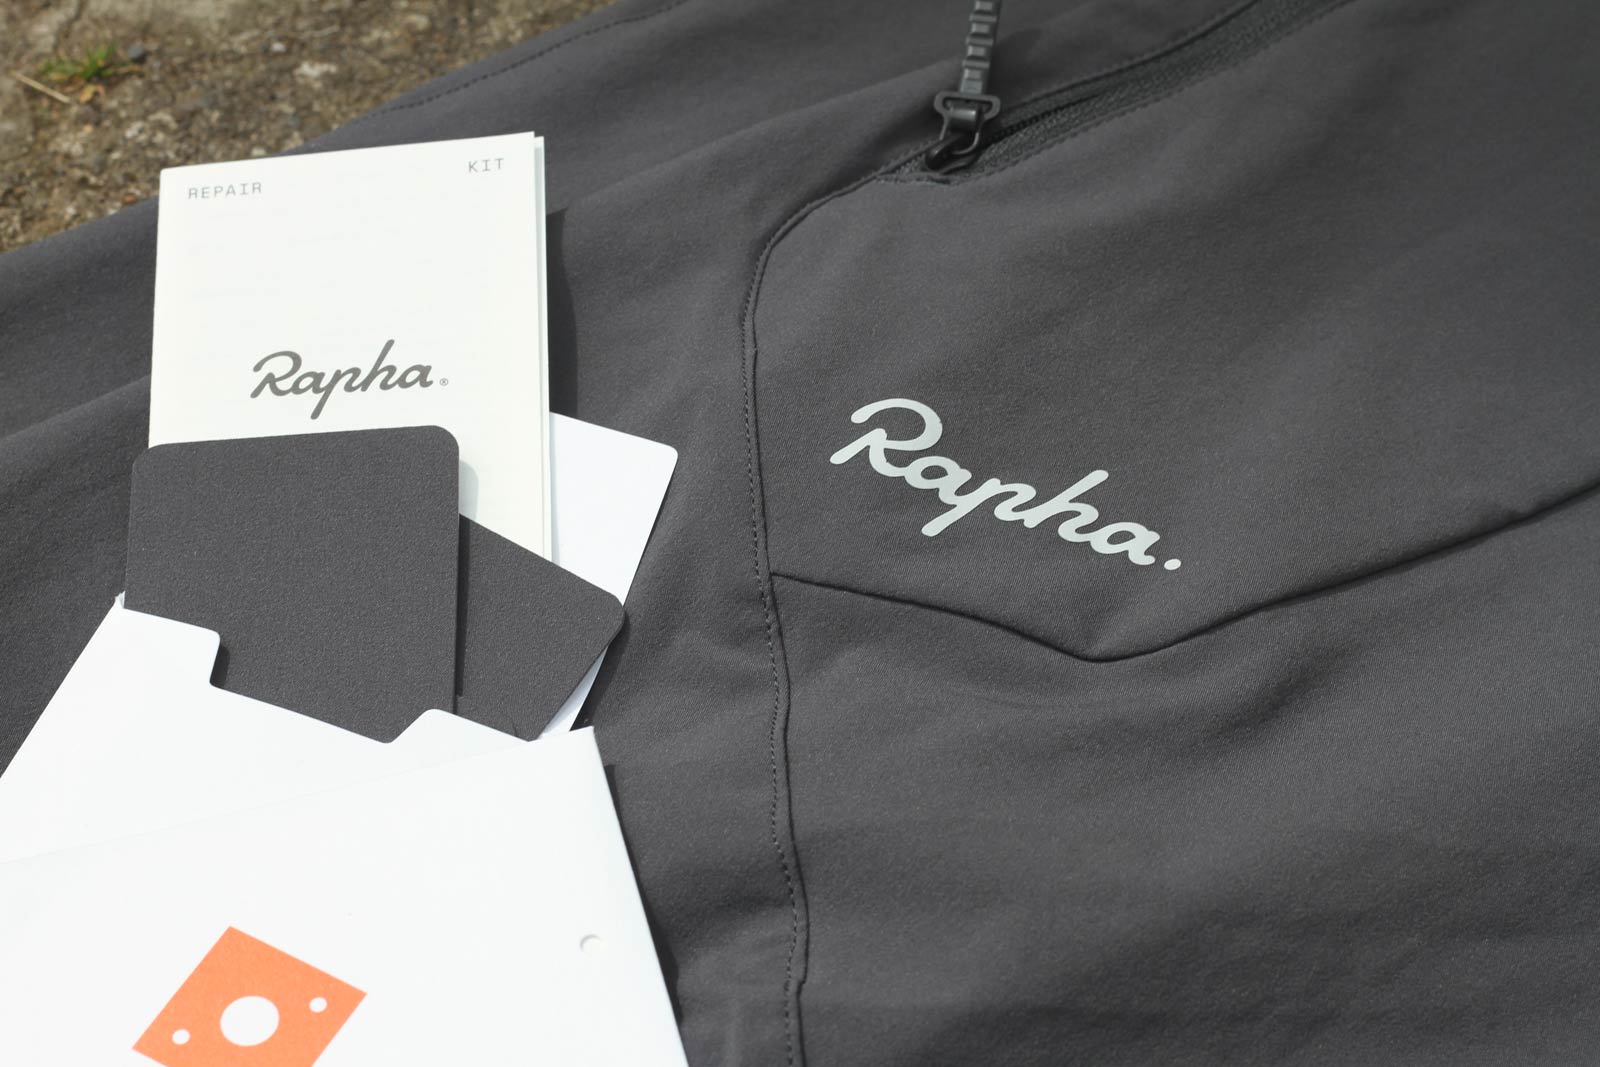 rapha trail fast + light shorts womens repair kit patches